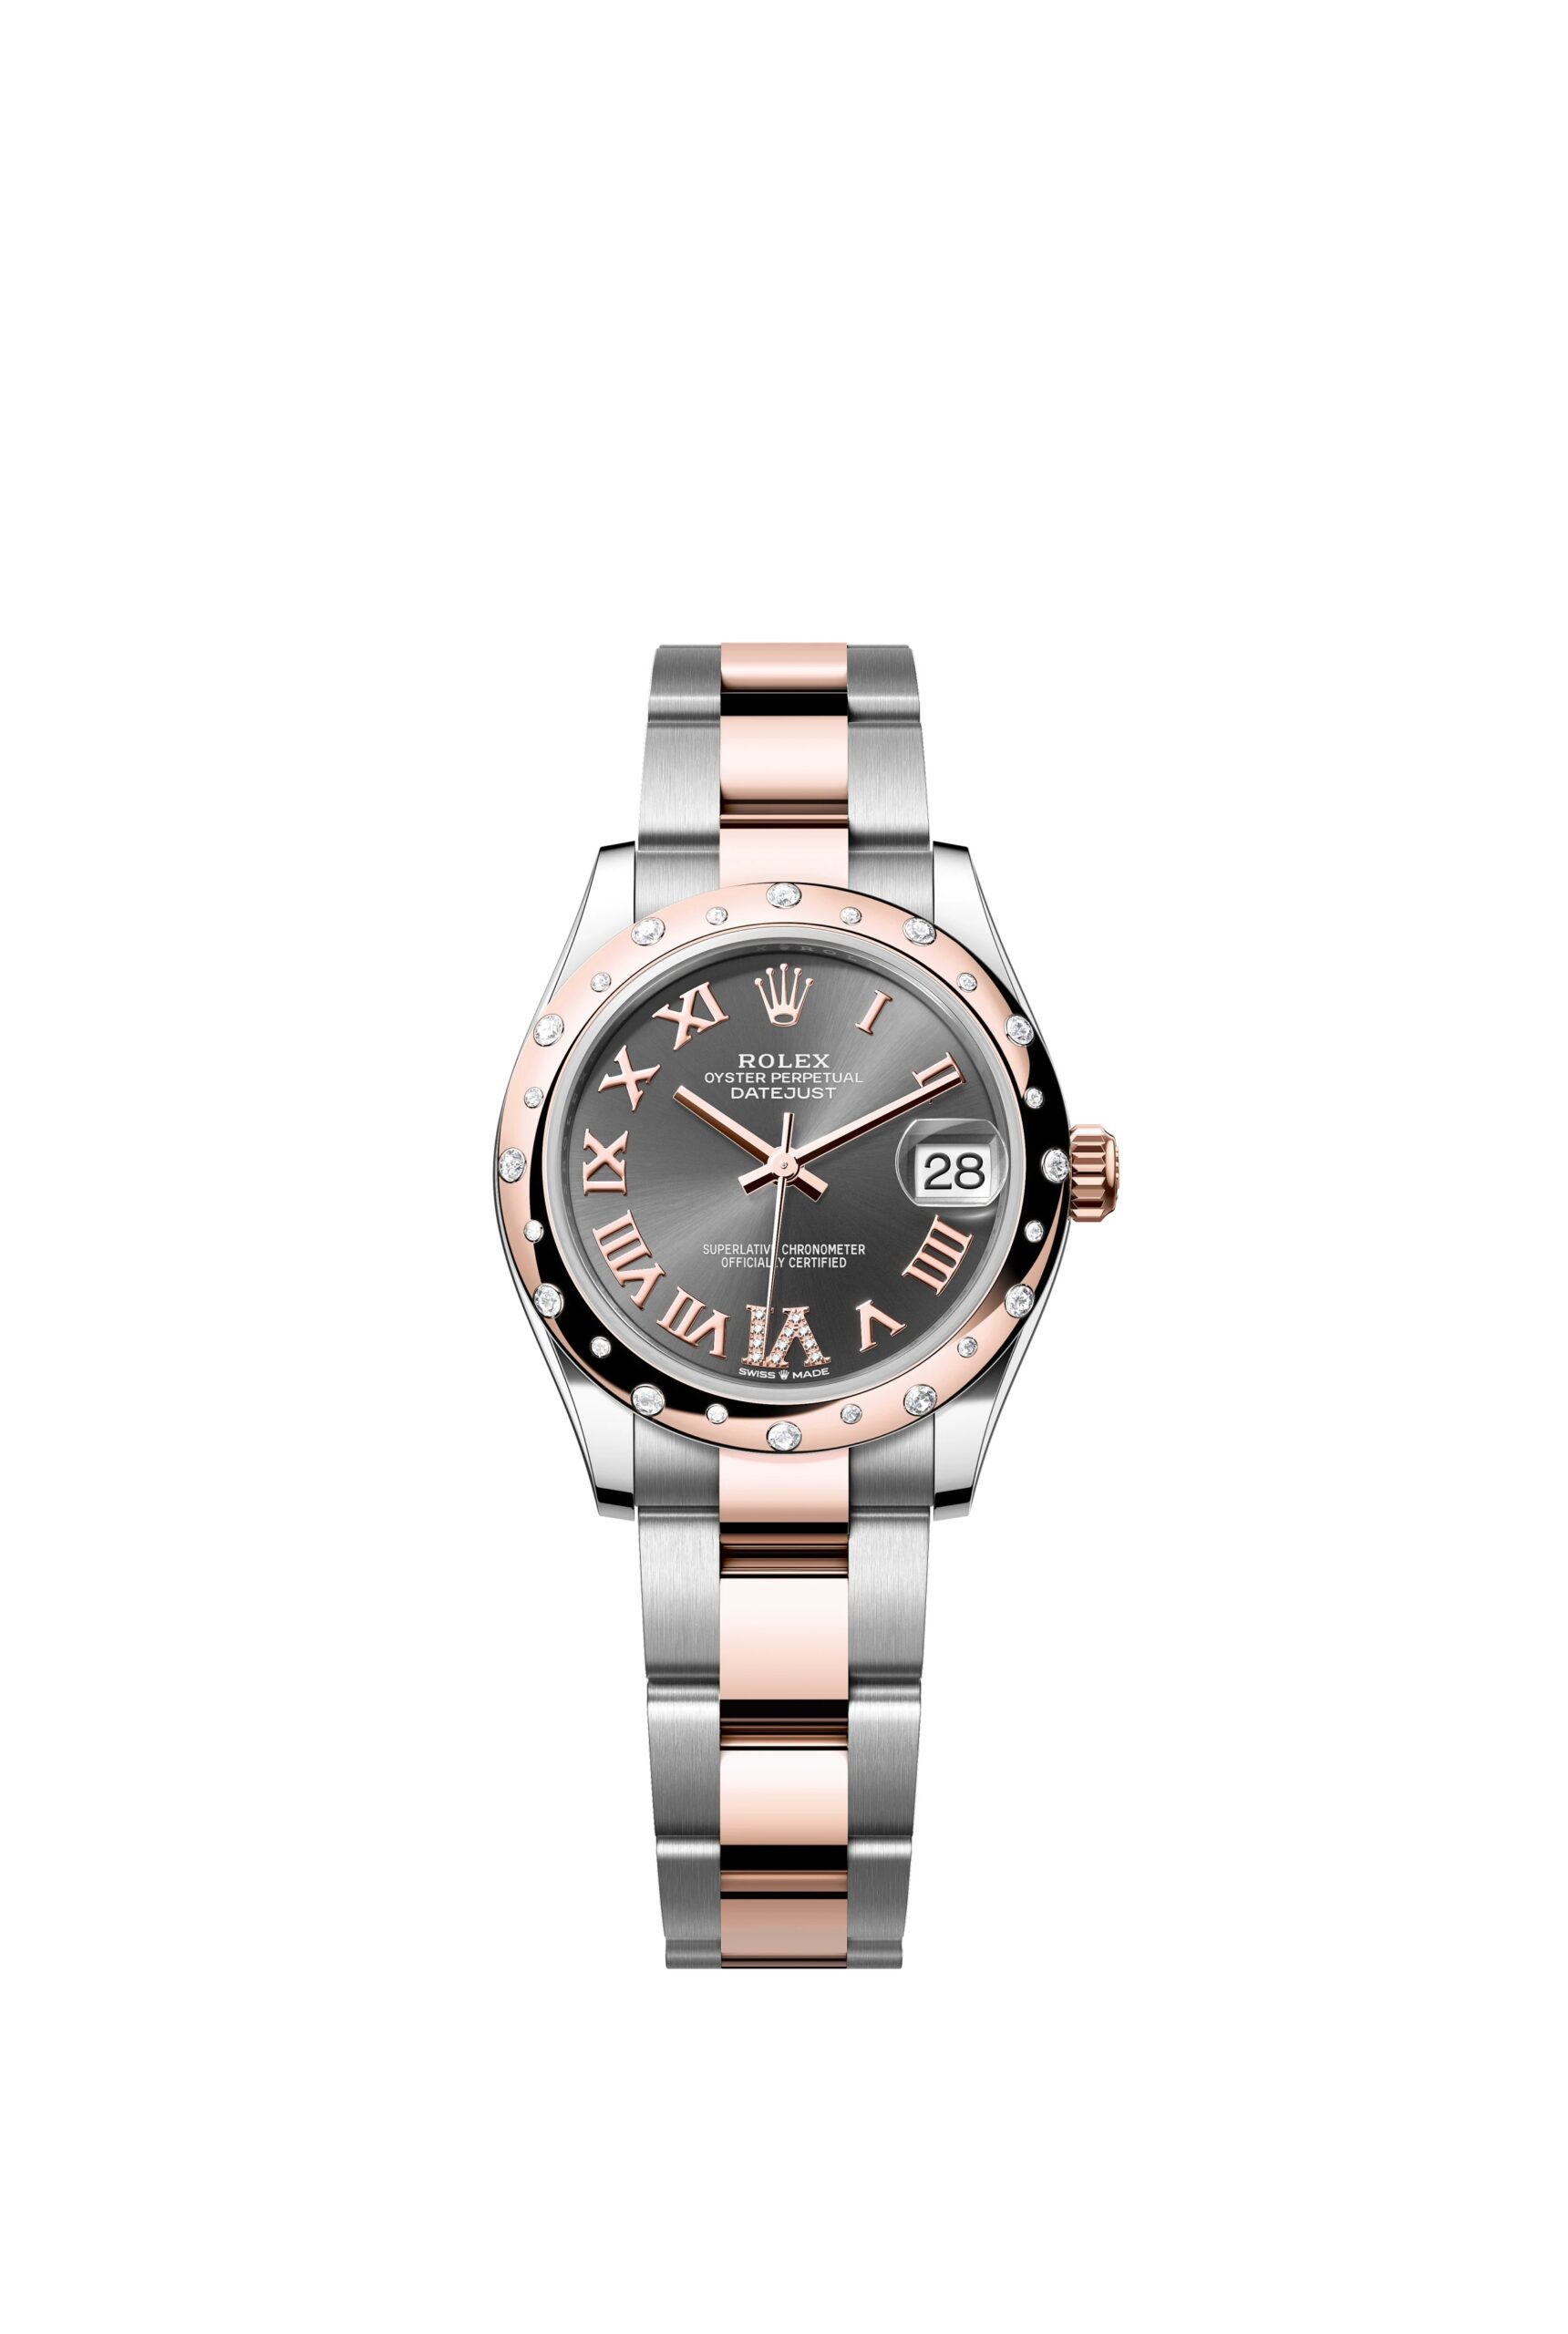 Rolex Datejust 31 Oyster, 31 mm, Oystersteel, Everose gold and diamonds Reference 278341RBR